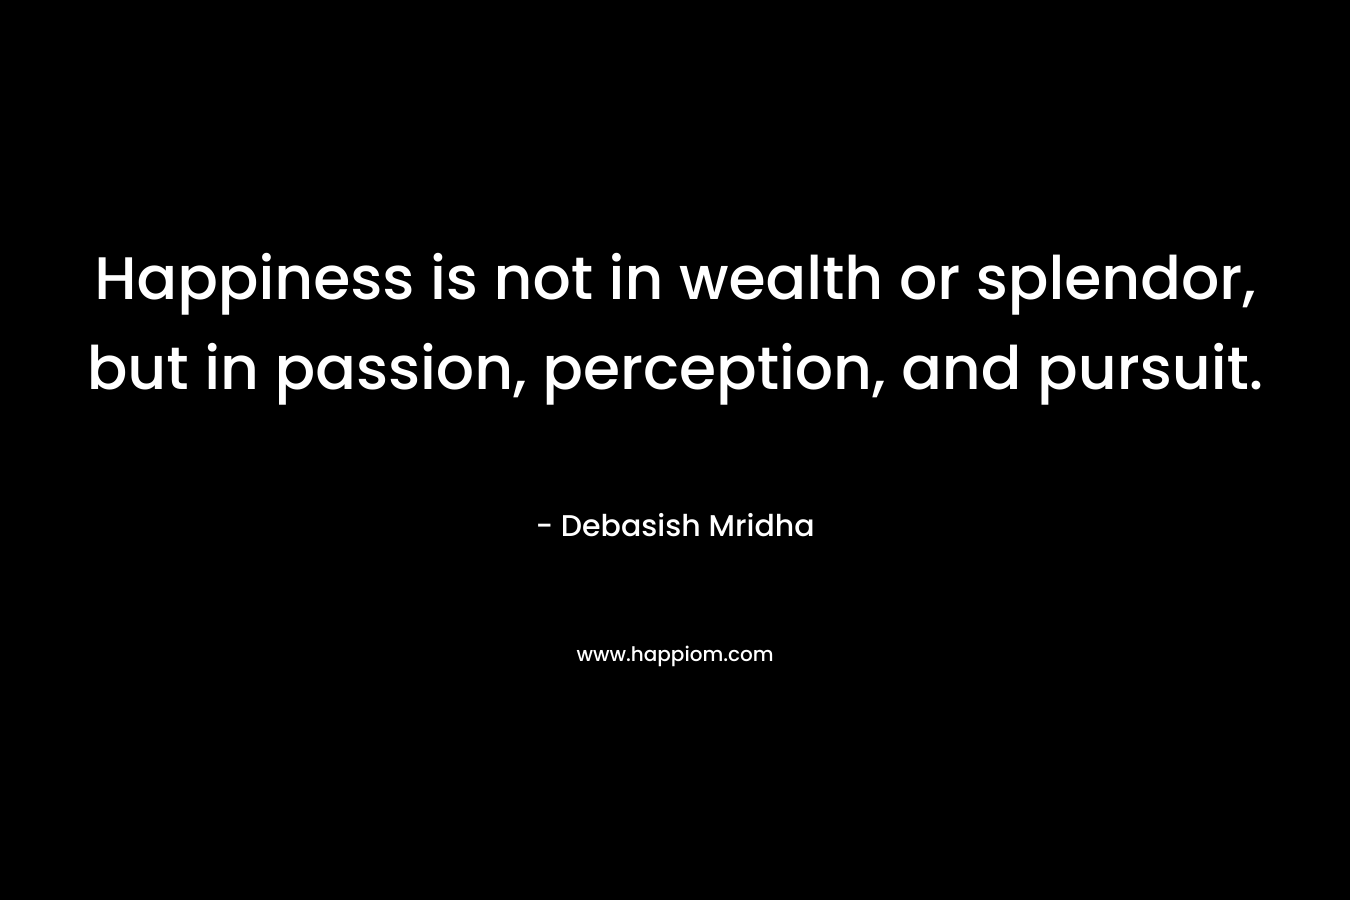 Happiness is not in wealth or splendor, but in passion, perception, and pursuit.